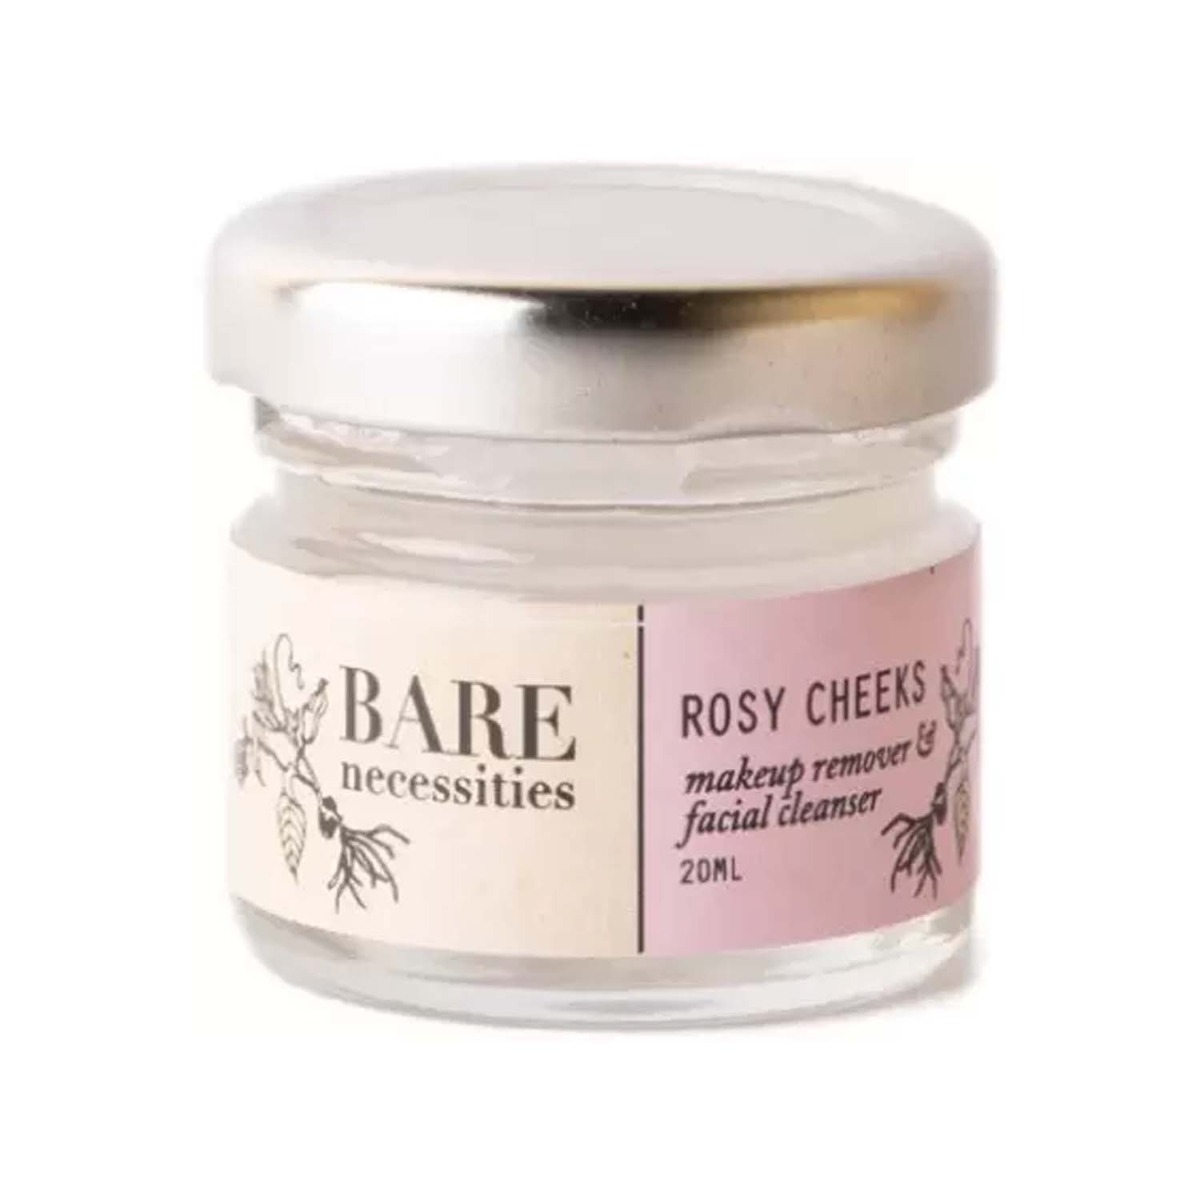 Bare Necessities Rosy Cheeks Makeup Remover and Facial Cleanser, 20ml